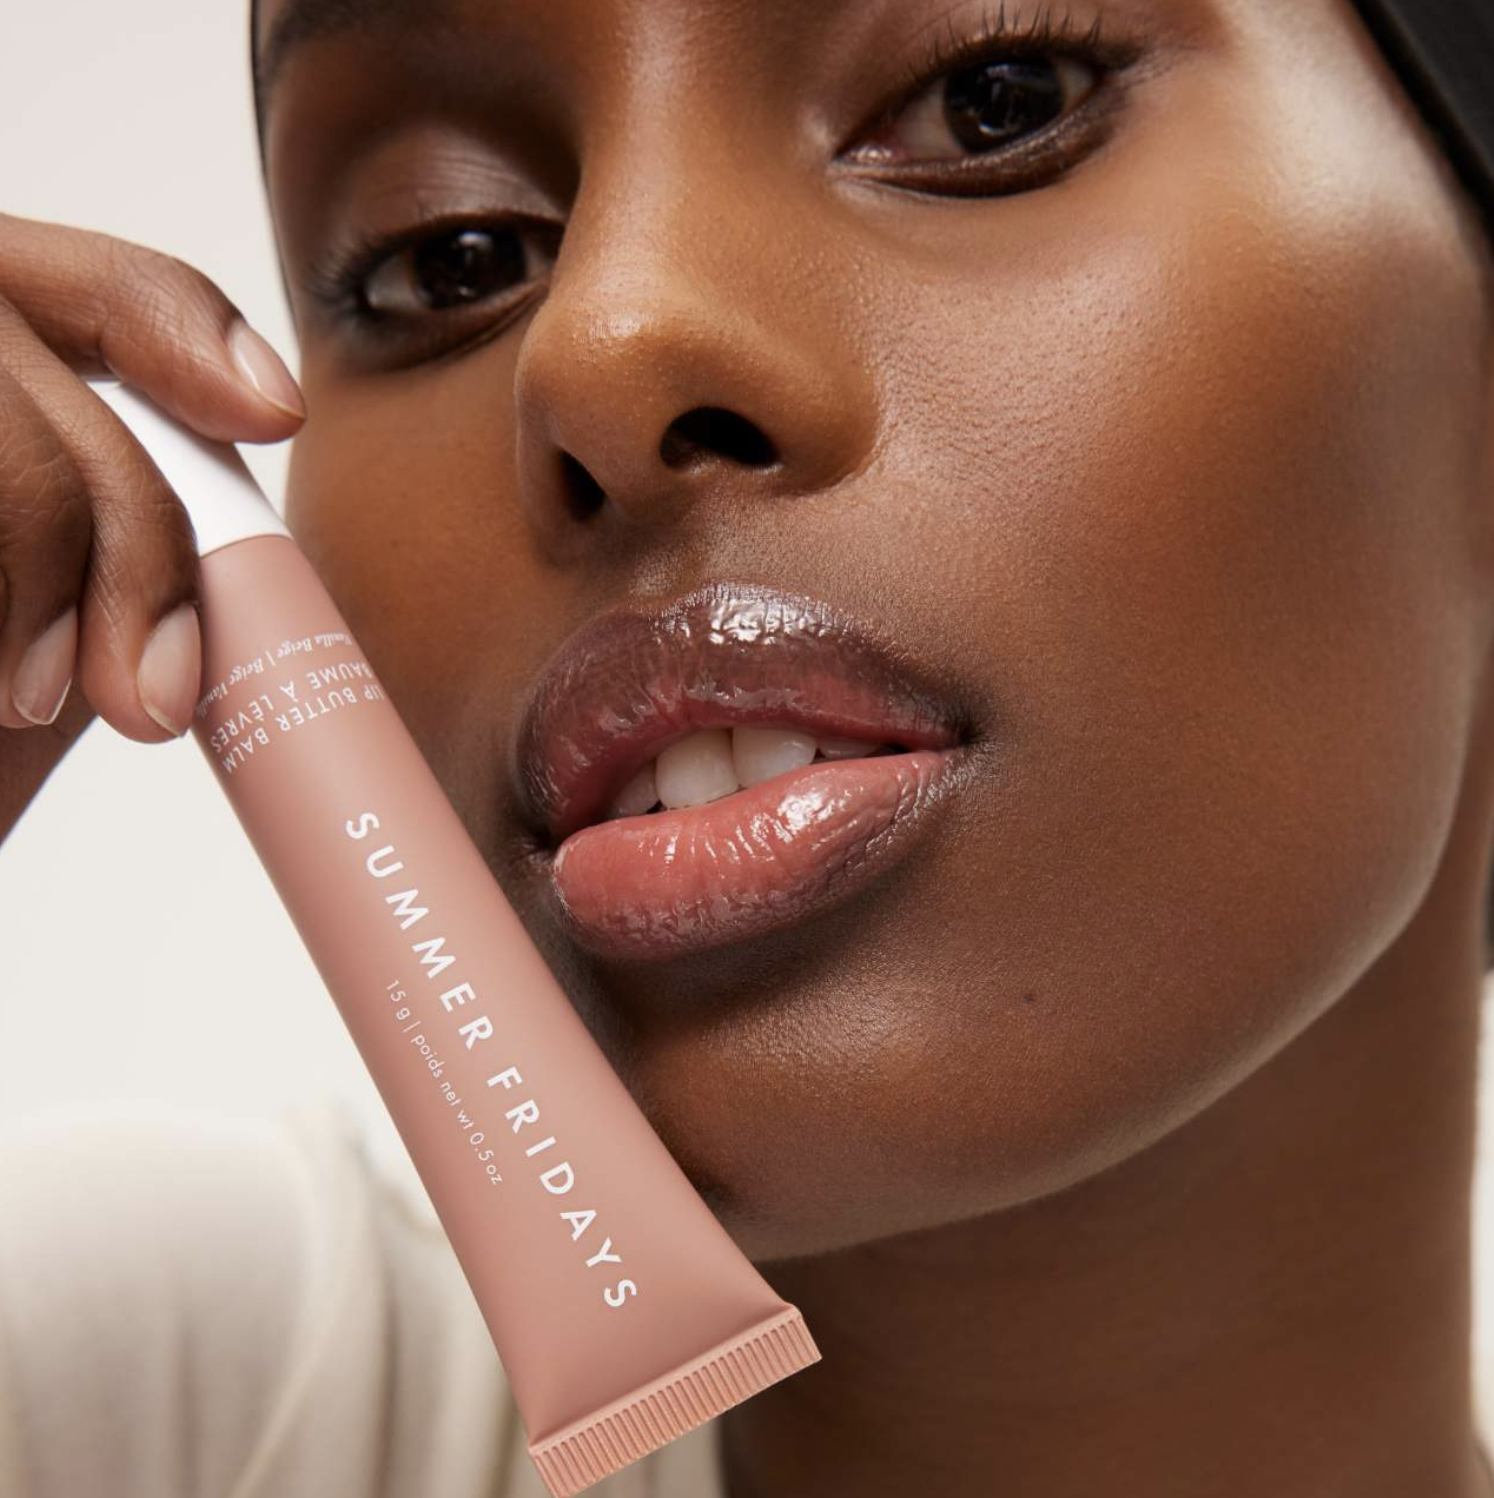 Close-up of a person holding a Summer Fridays skincare tube near their face